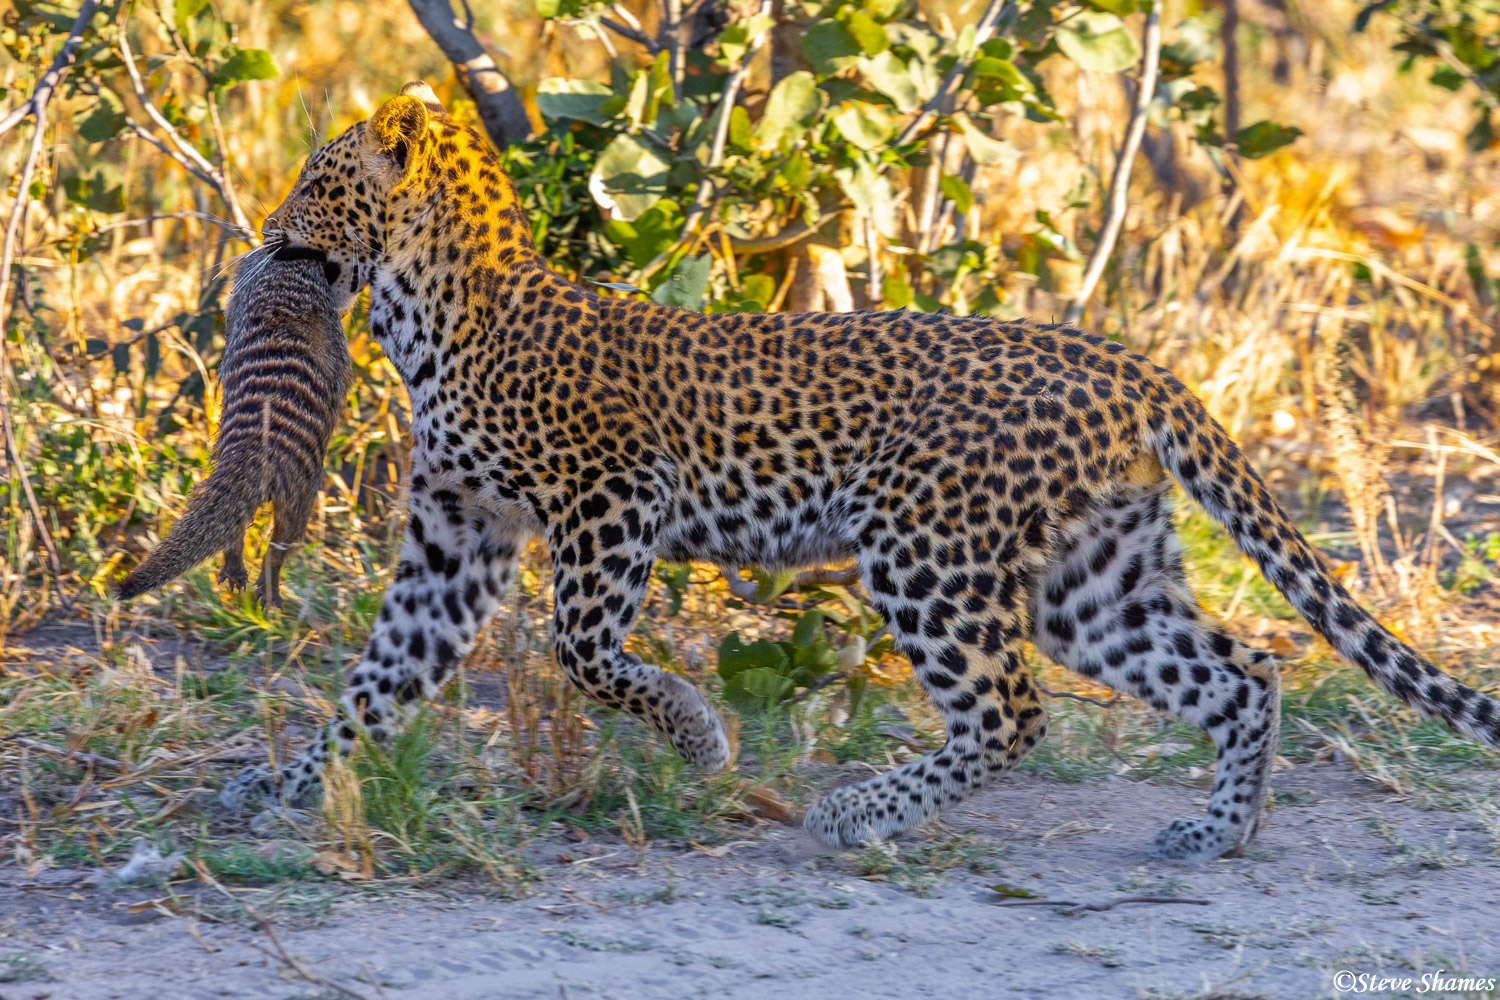 Here is a leopard running off with its mongoose kill.